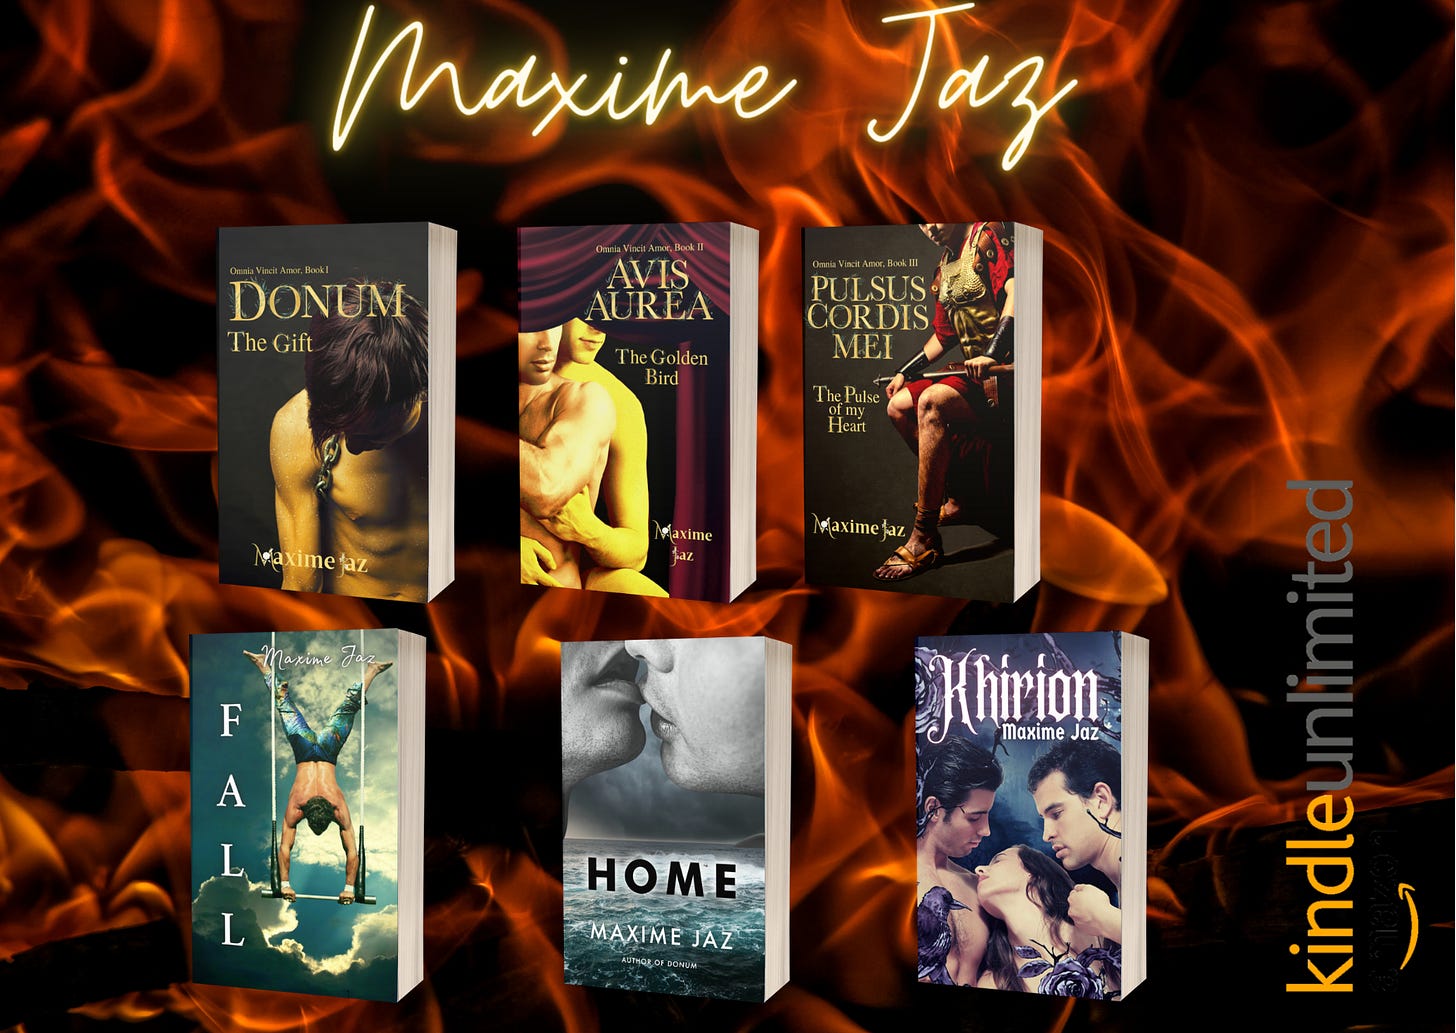 Flaming background Top in yellow glowing handwritten font Maxime Jaz From left to right mockups of the books: Omnia Vincit trilogy Book 1,2,3  Donum, a young man half-naked head lowered, golden skin.  Avis Aurea, two men half-naked, one embracing the other from the back.  Pulsus Cordis Mei a Roman general sitting in his armor.  Fall- an acrobat doing a handstand on a trapeze swing.  Home- two men’s lips locking on top, in greyscale, a storm in the background and a frothy sea under their faces.  Khirion- Title in white glowing gothic font Khirion, under it the author's name Maxime Jaz. The frame is black roses on vines and a raven sitting on the left bottom corner. There are three characters in the middle, naked, they are only visible to the shoulders, and chest for the left one. Two men framing a woman.